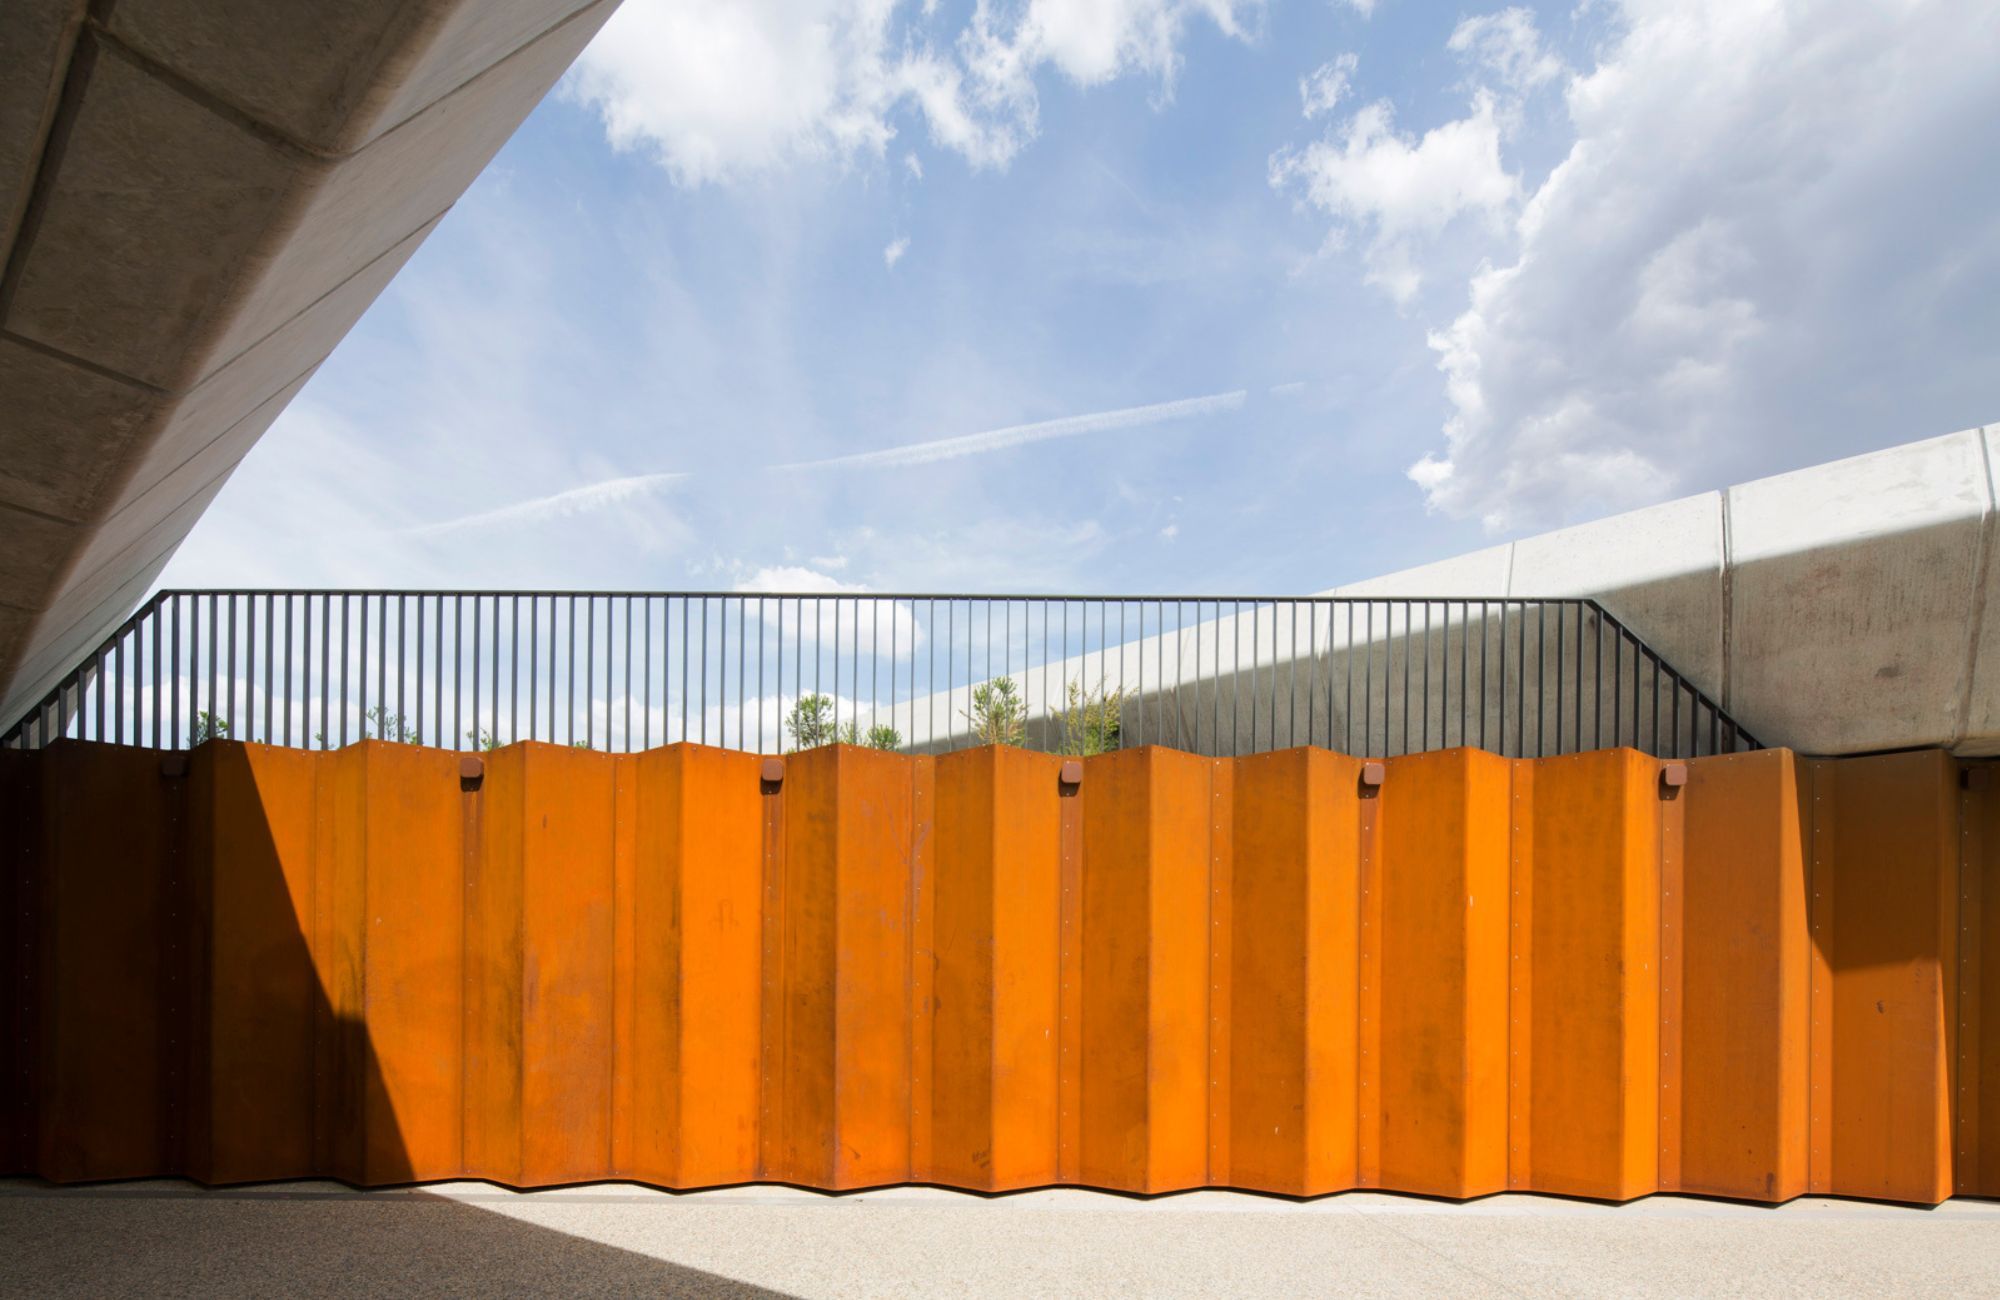 Bowen Place Crossing by Lahznimmo showing corten wall